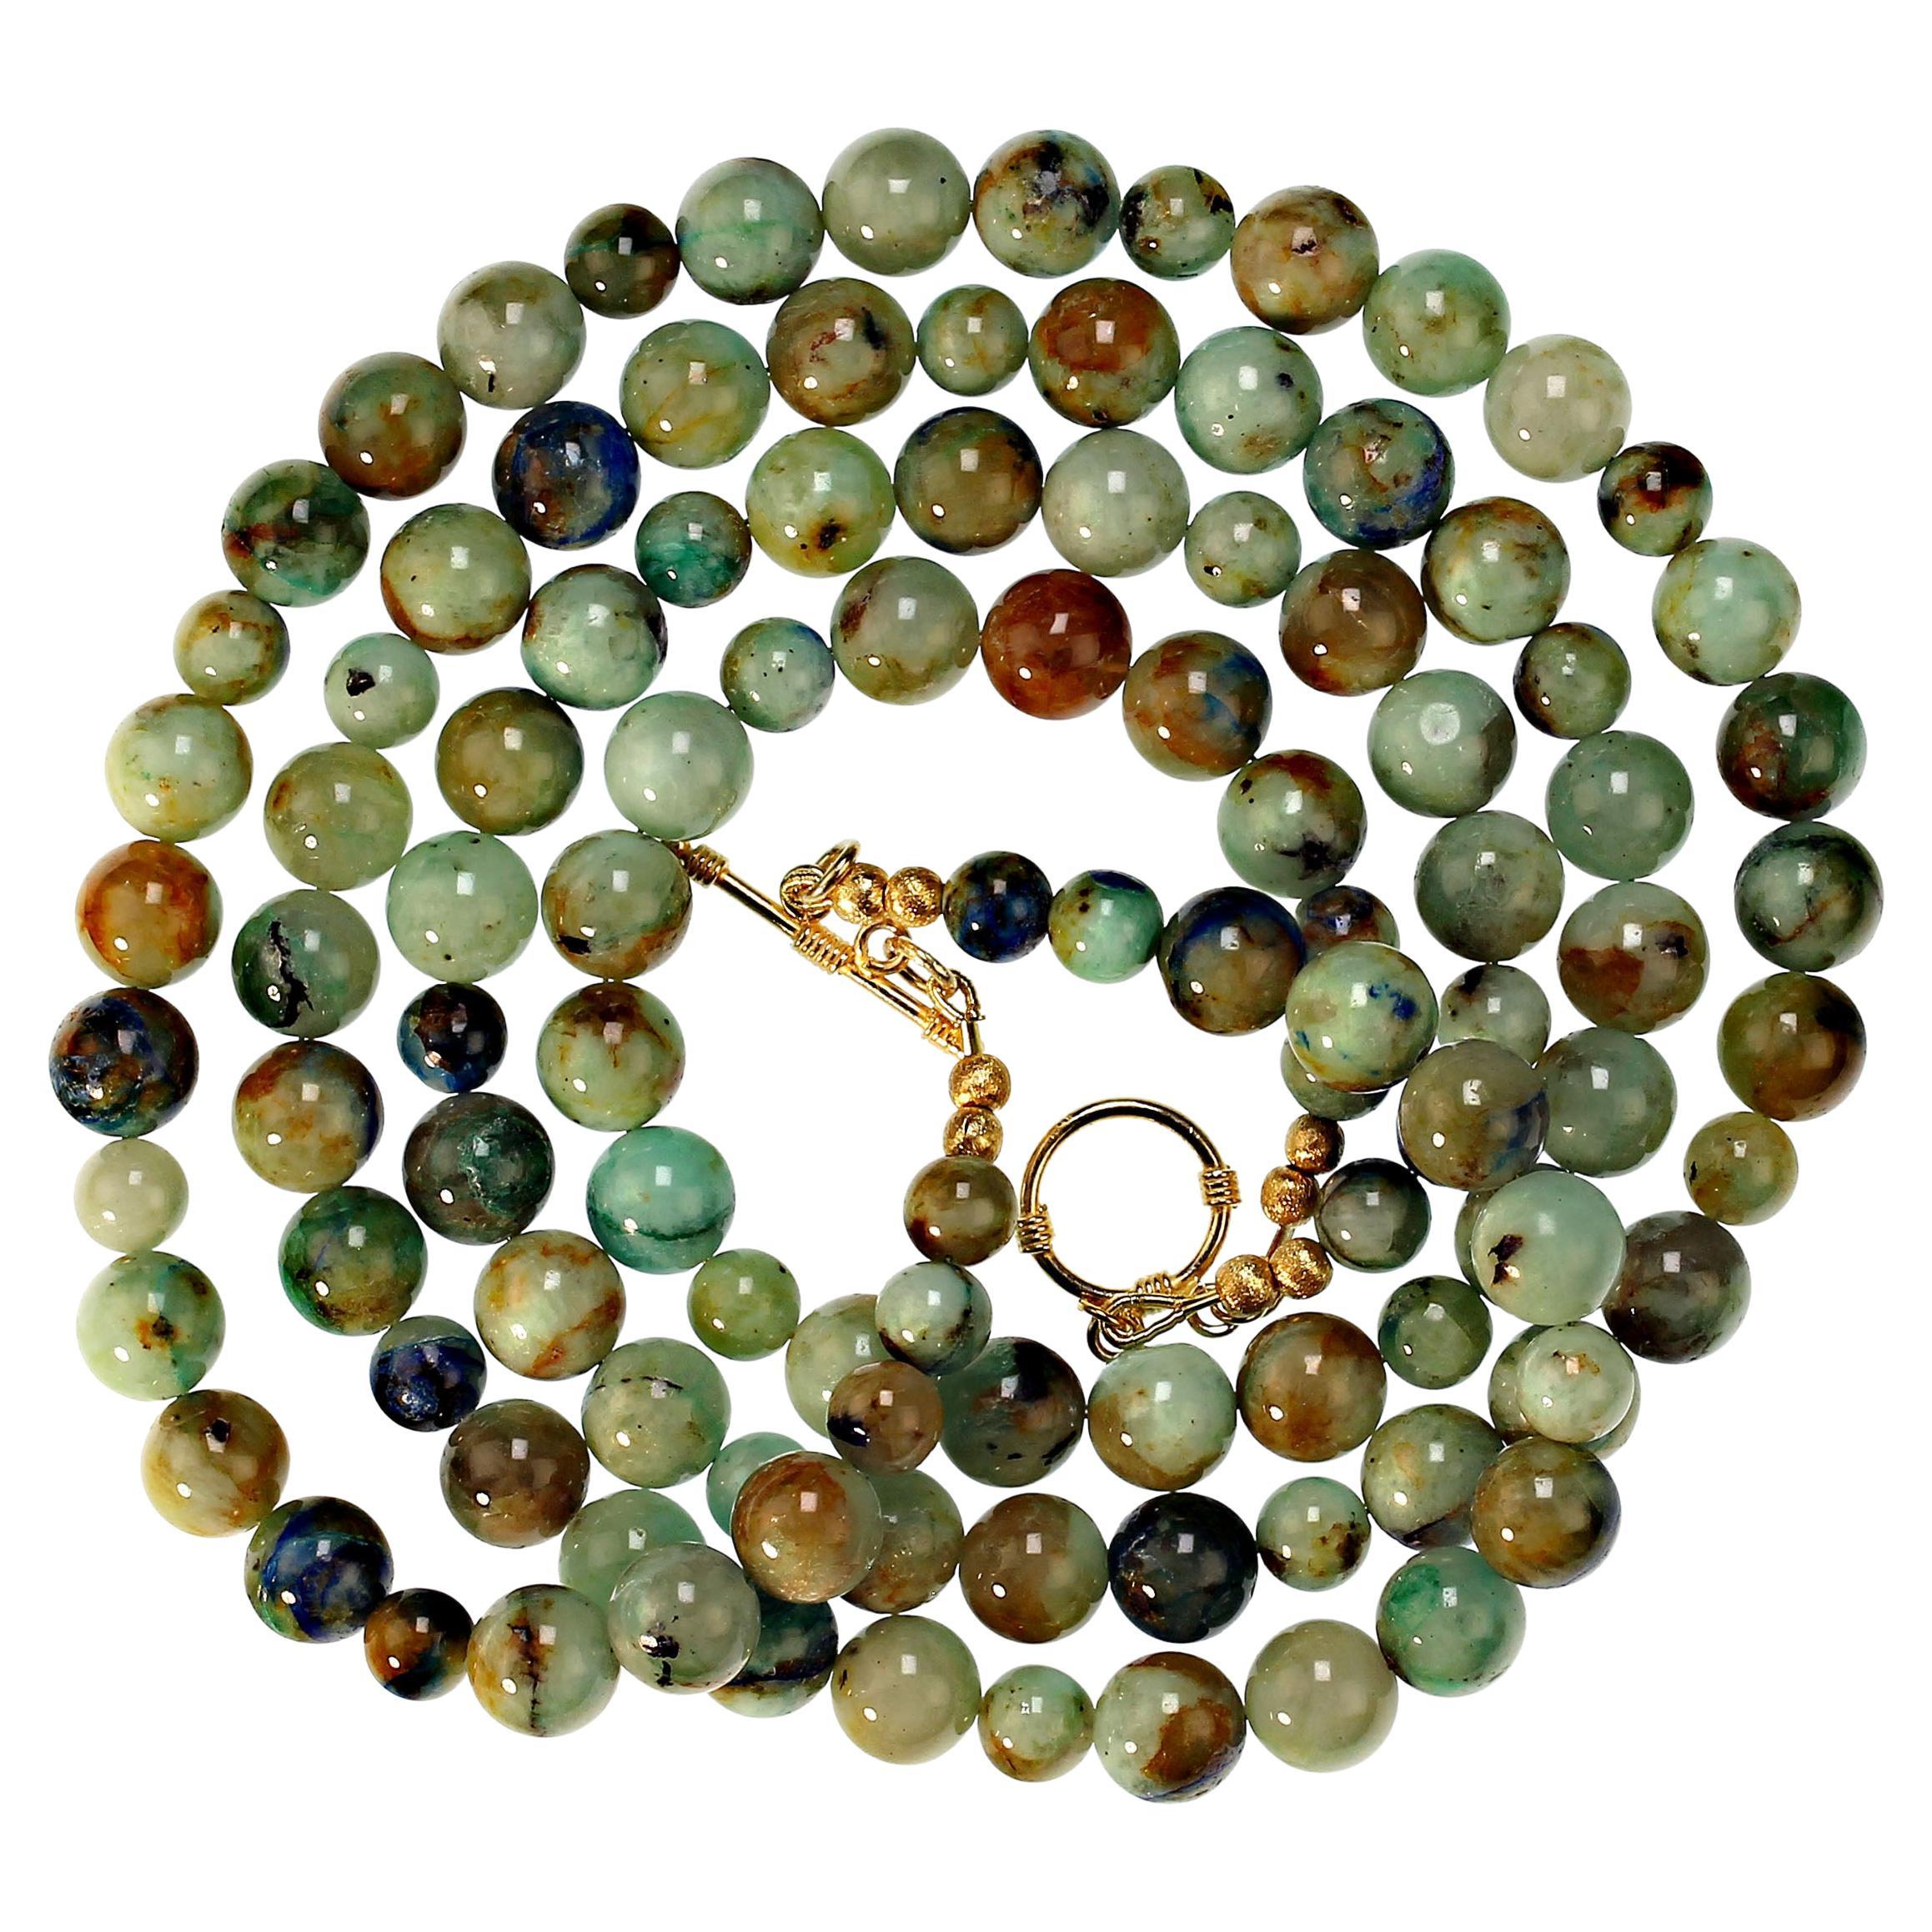 Gloriously green Chrysocolla and lots of other colors in this double strand 22 inch.  Green enhances everything.  Wear this gorgeous necklace with all your winter wardrobe.  The 10mm and 8mm beads feature shades of green, blue, brown, tan, and